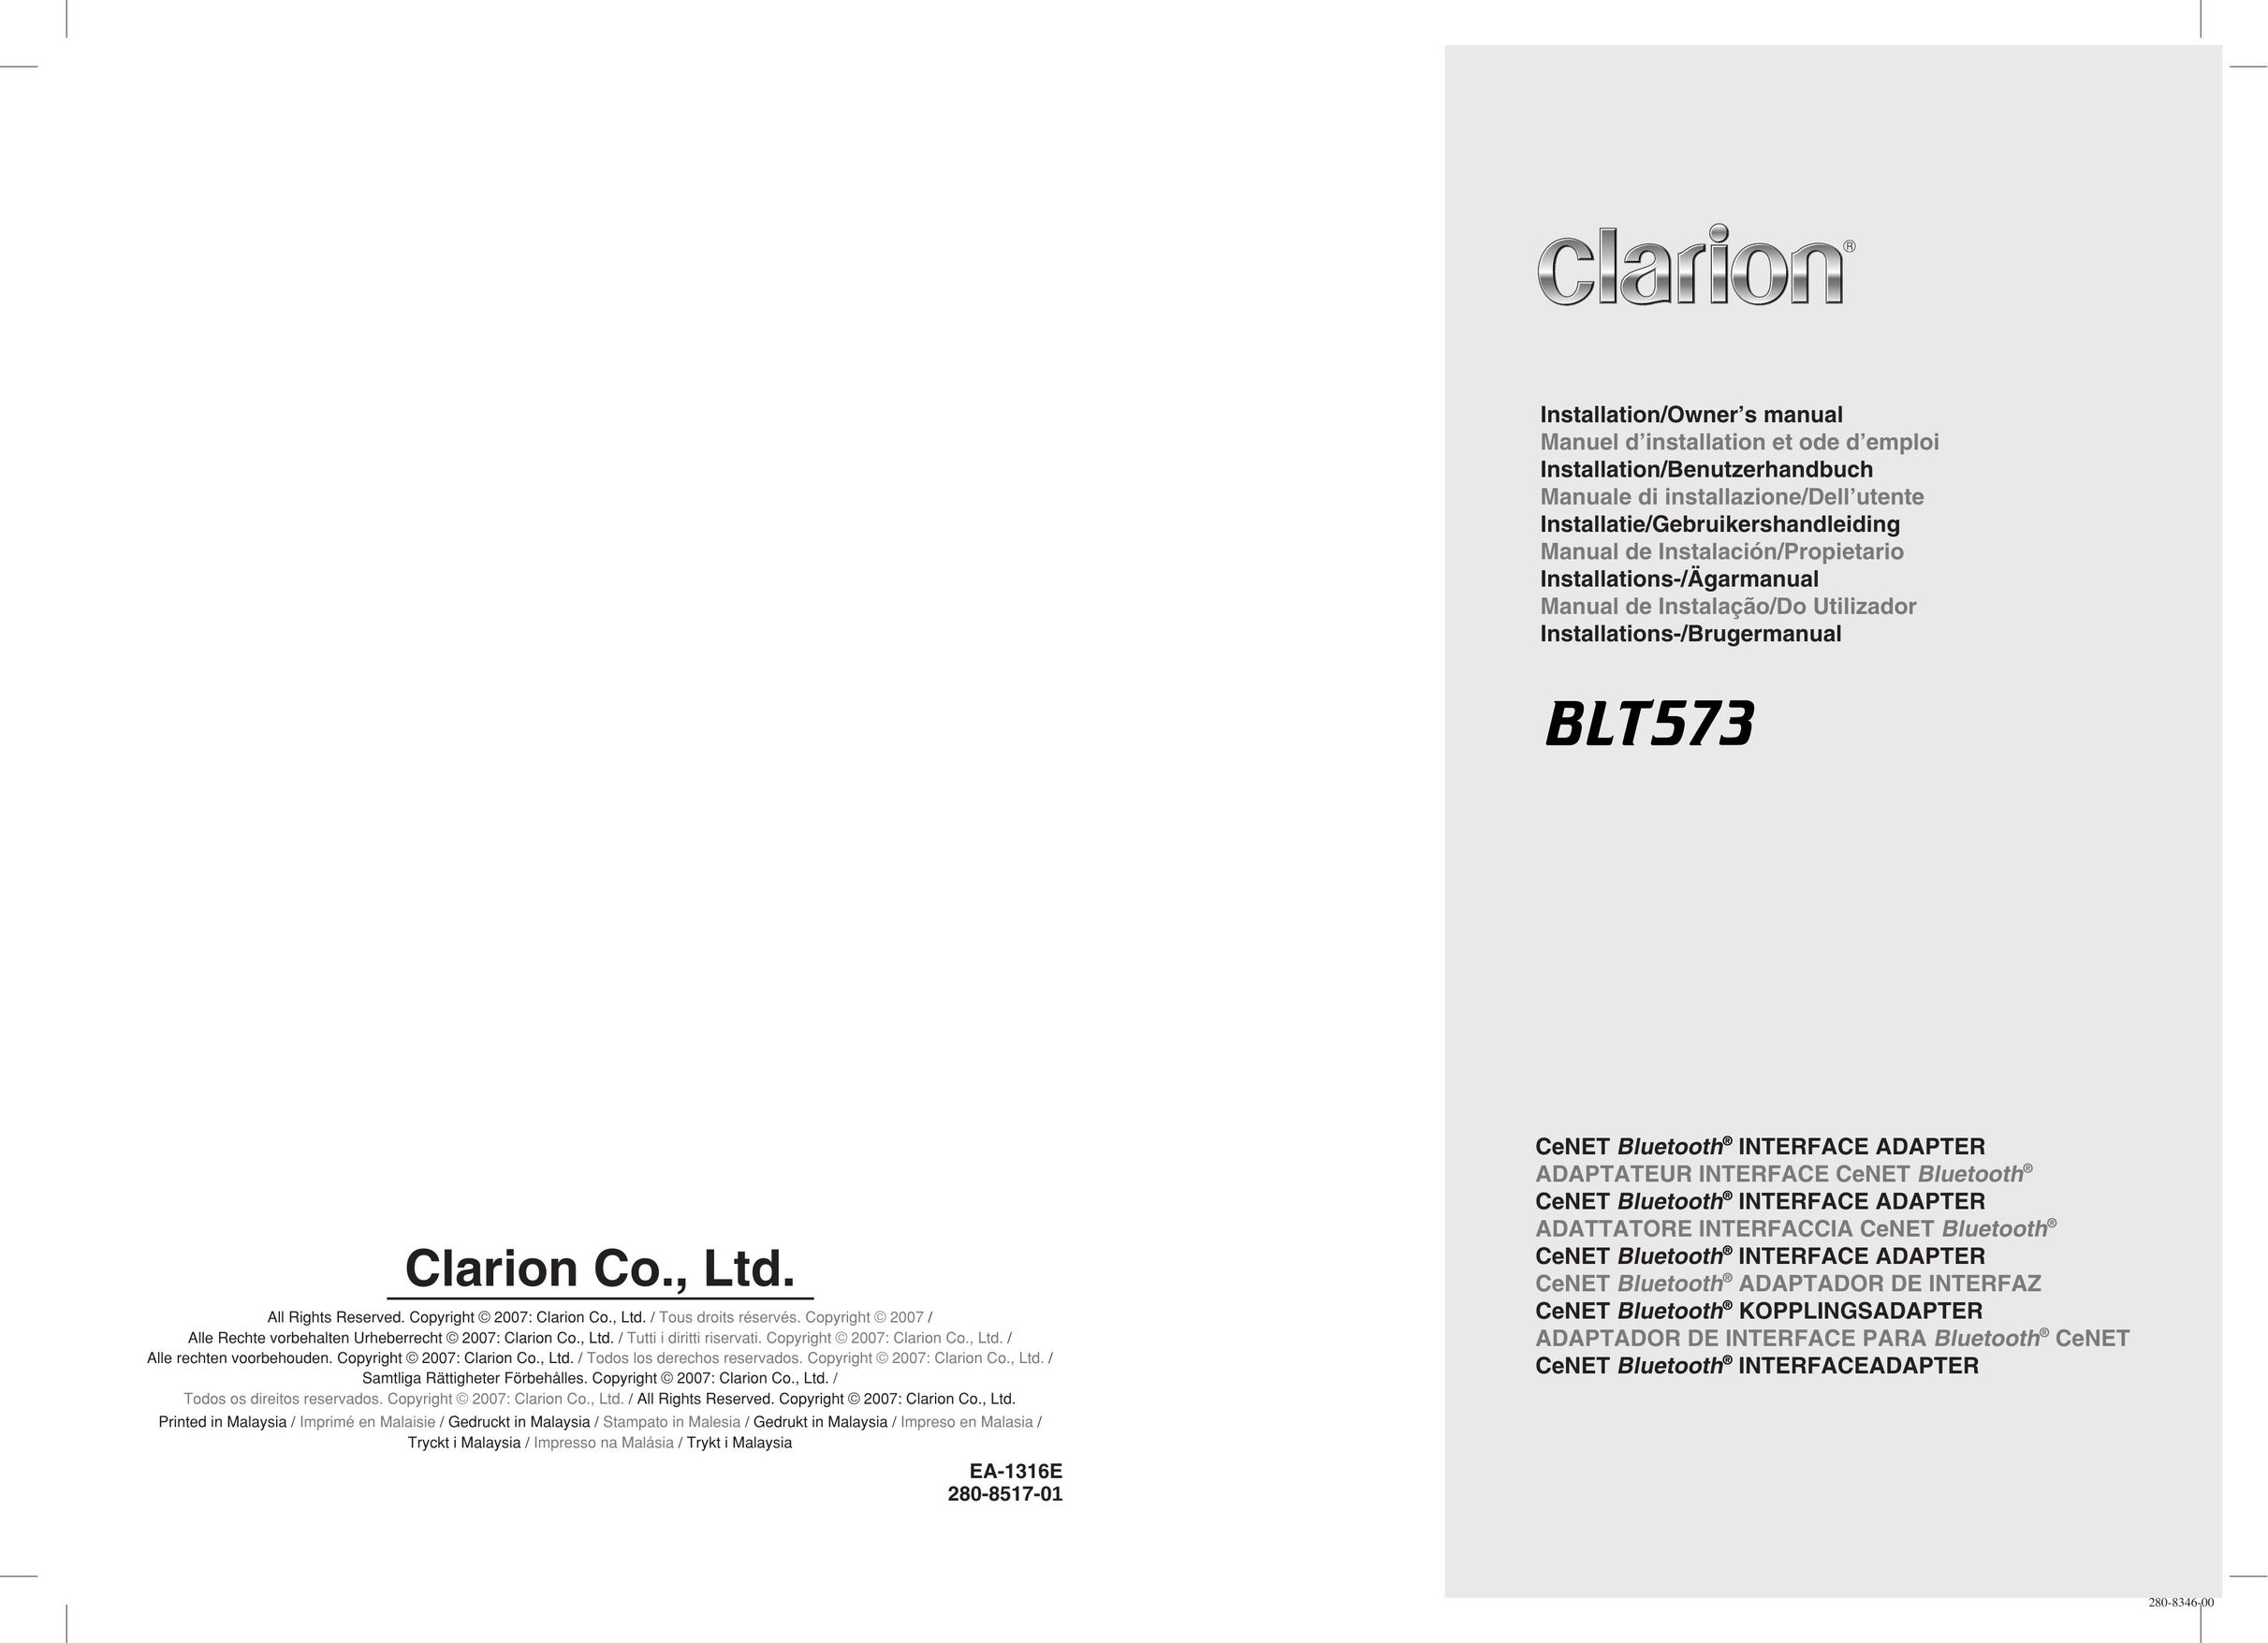 Clarion BLT573 Network Card User Manual